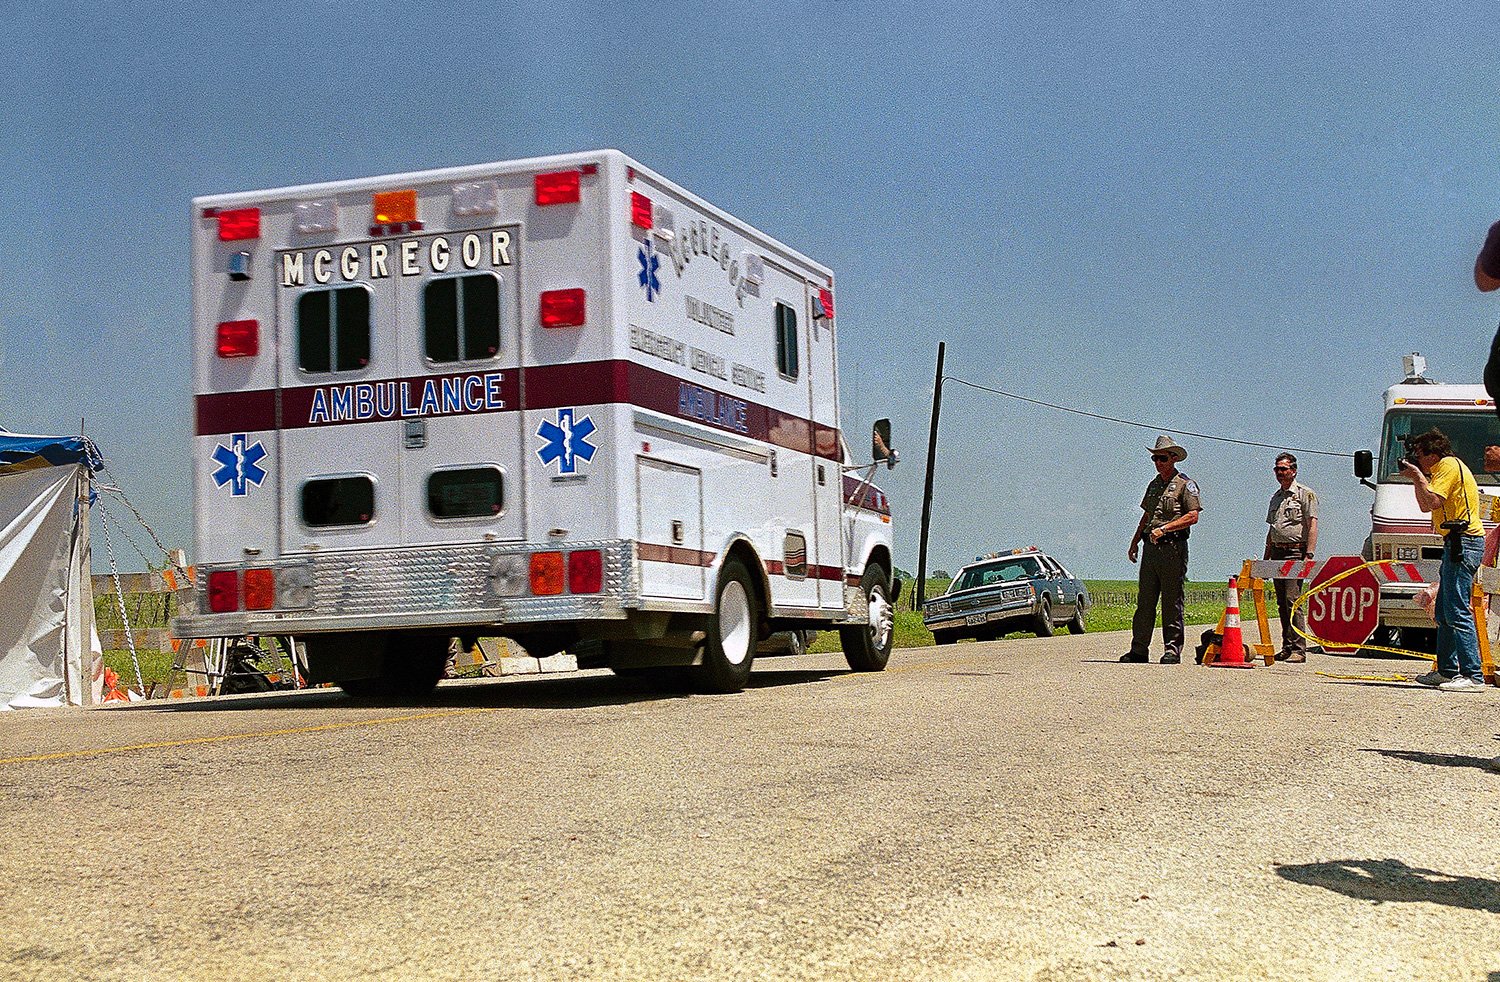  An ambulance passes a Texas Department of Public Safety checkpoint heading towards the Branch Davidian compound in Waco, Texas on Monday, April 19, 1993 as fire engulfed the structure. (AP Photo/Susan Weems) 